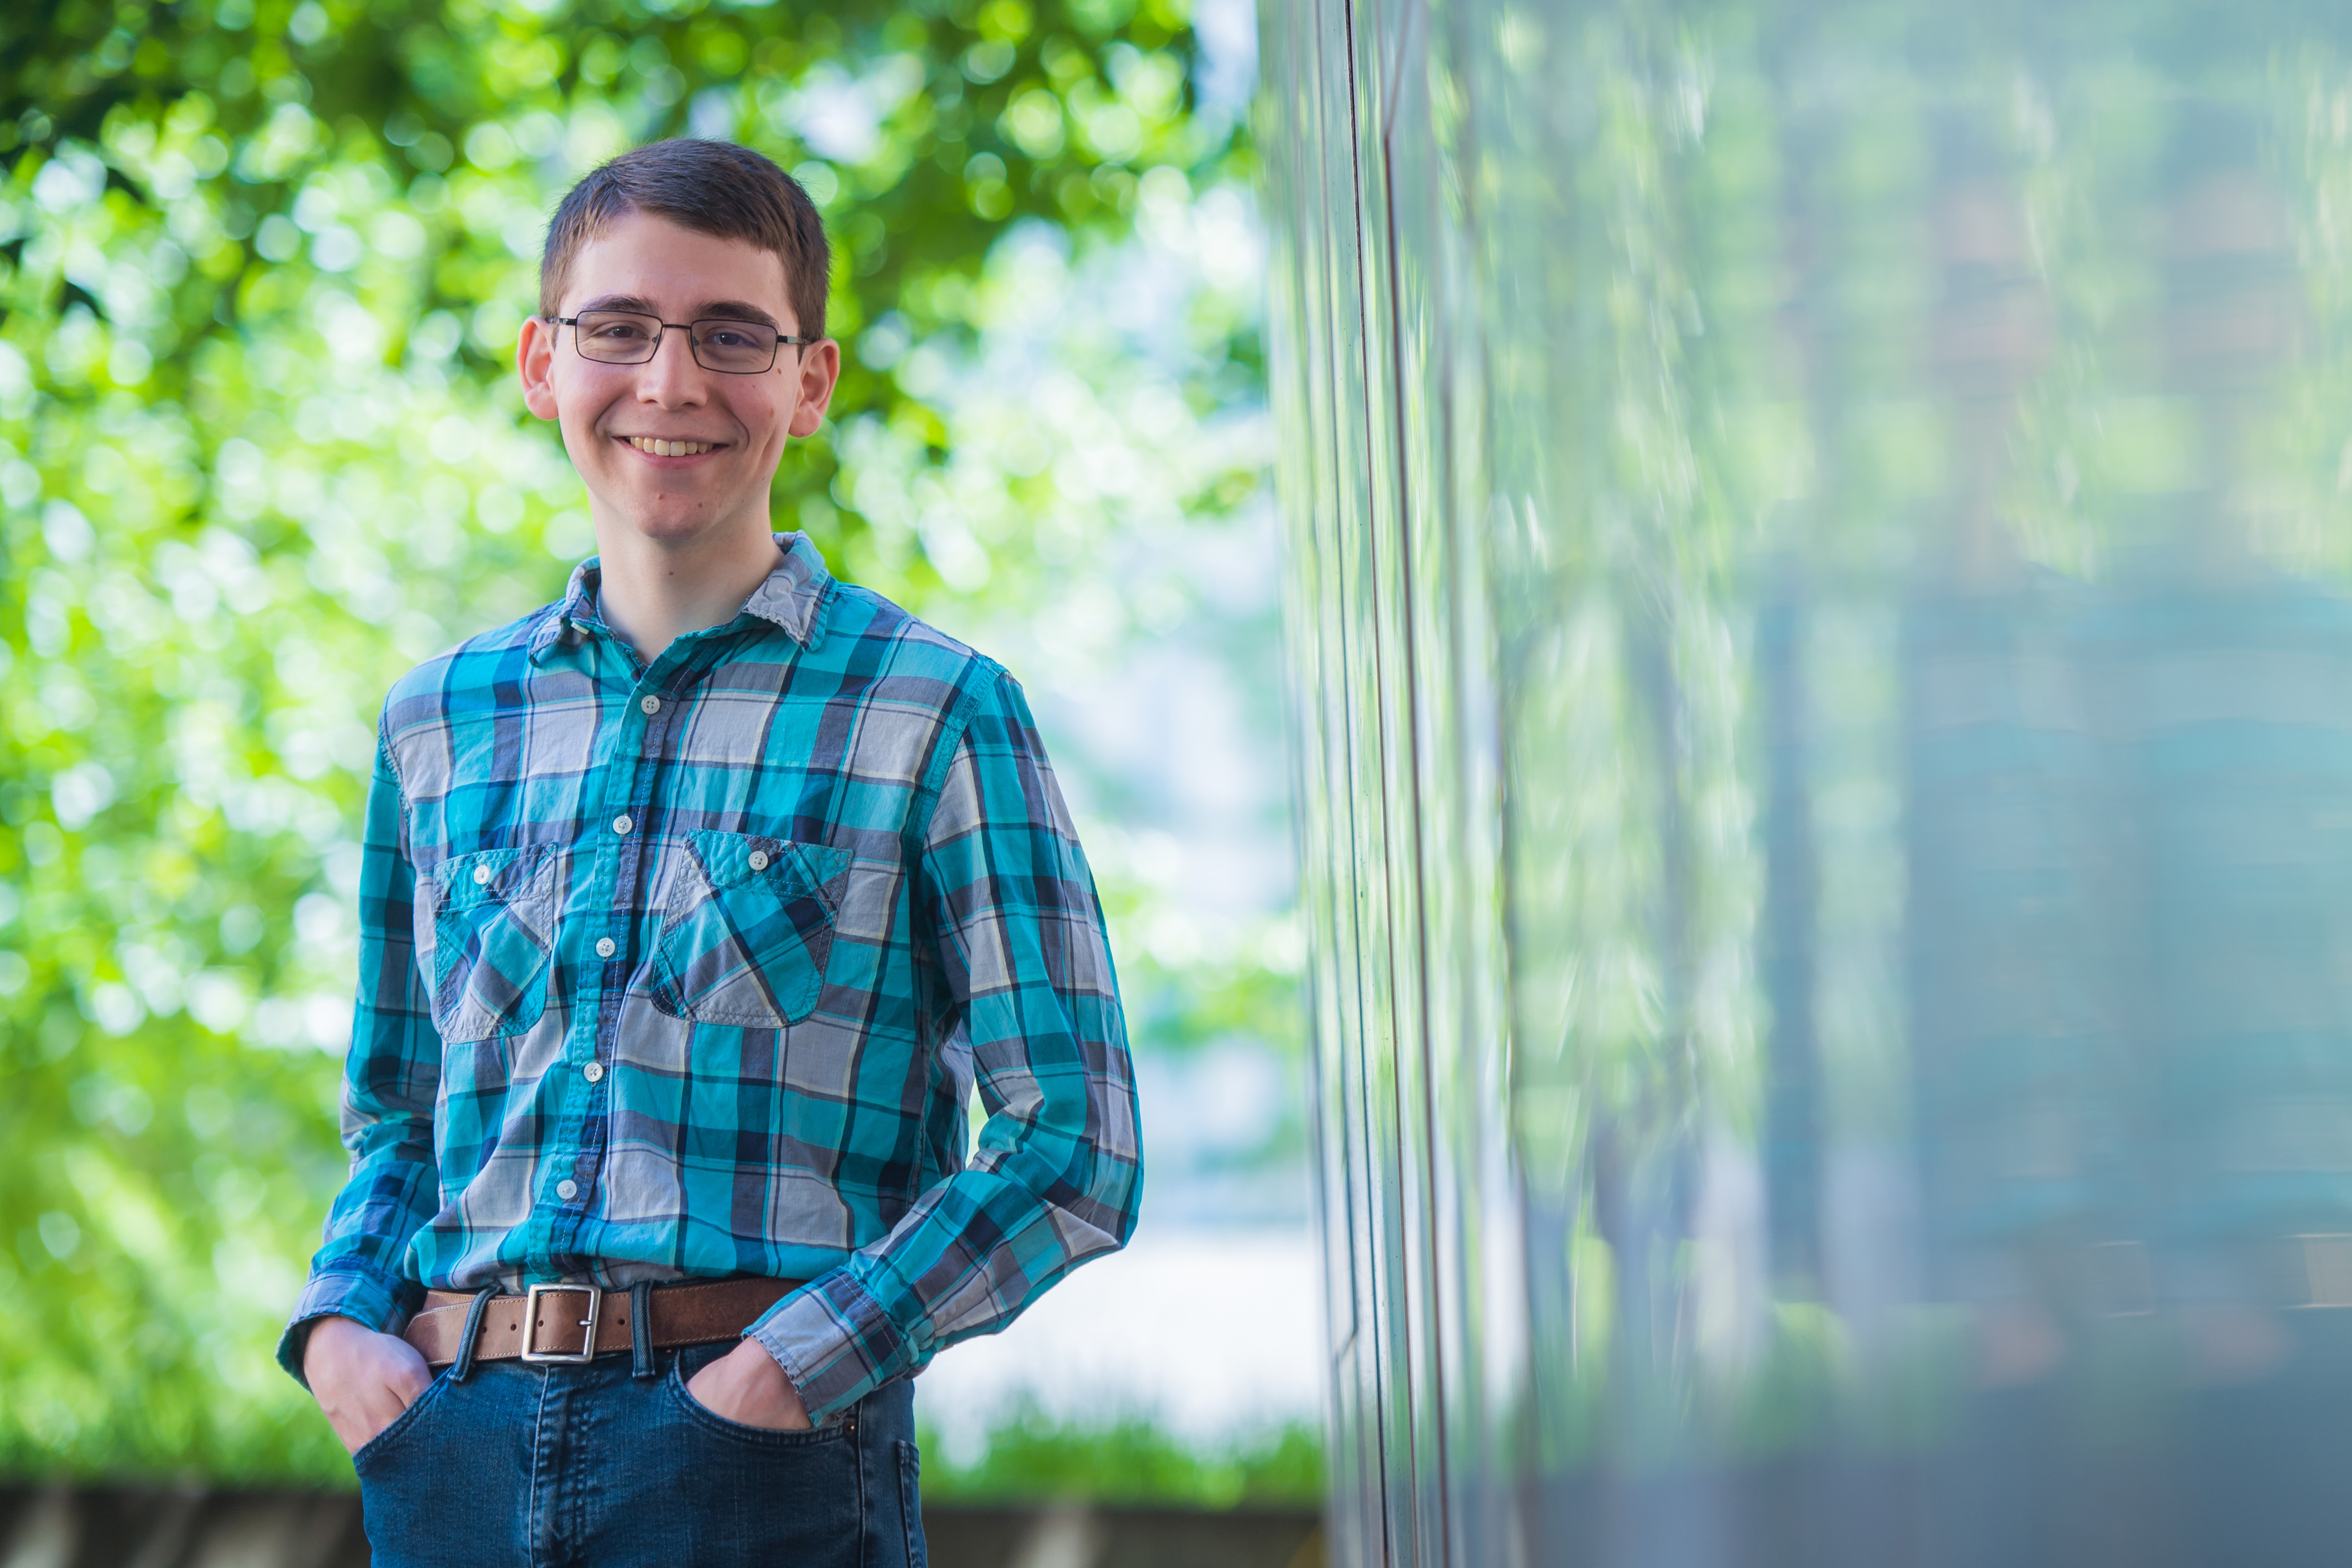 A second-year doctoral student in electrical engineering and computer science and affiliate of the Computer Science and Artificial Intelligence Laboratory (CSAIL), Sussman channels the energy he feels at MIT into his graduate research, which focuses on building better computer networks.